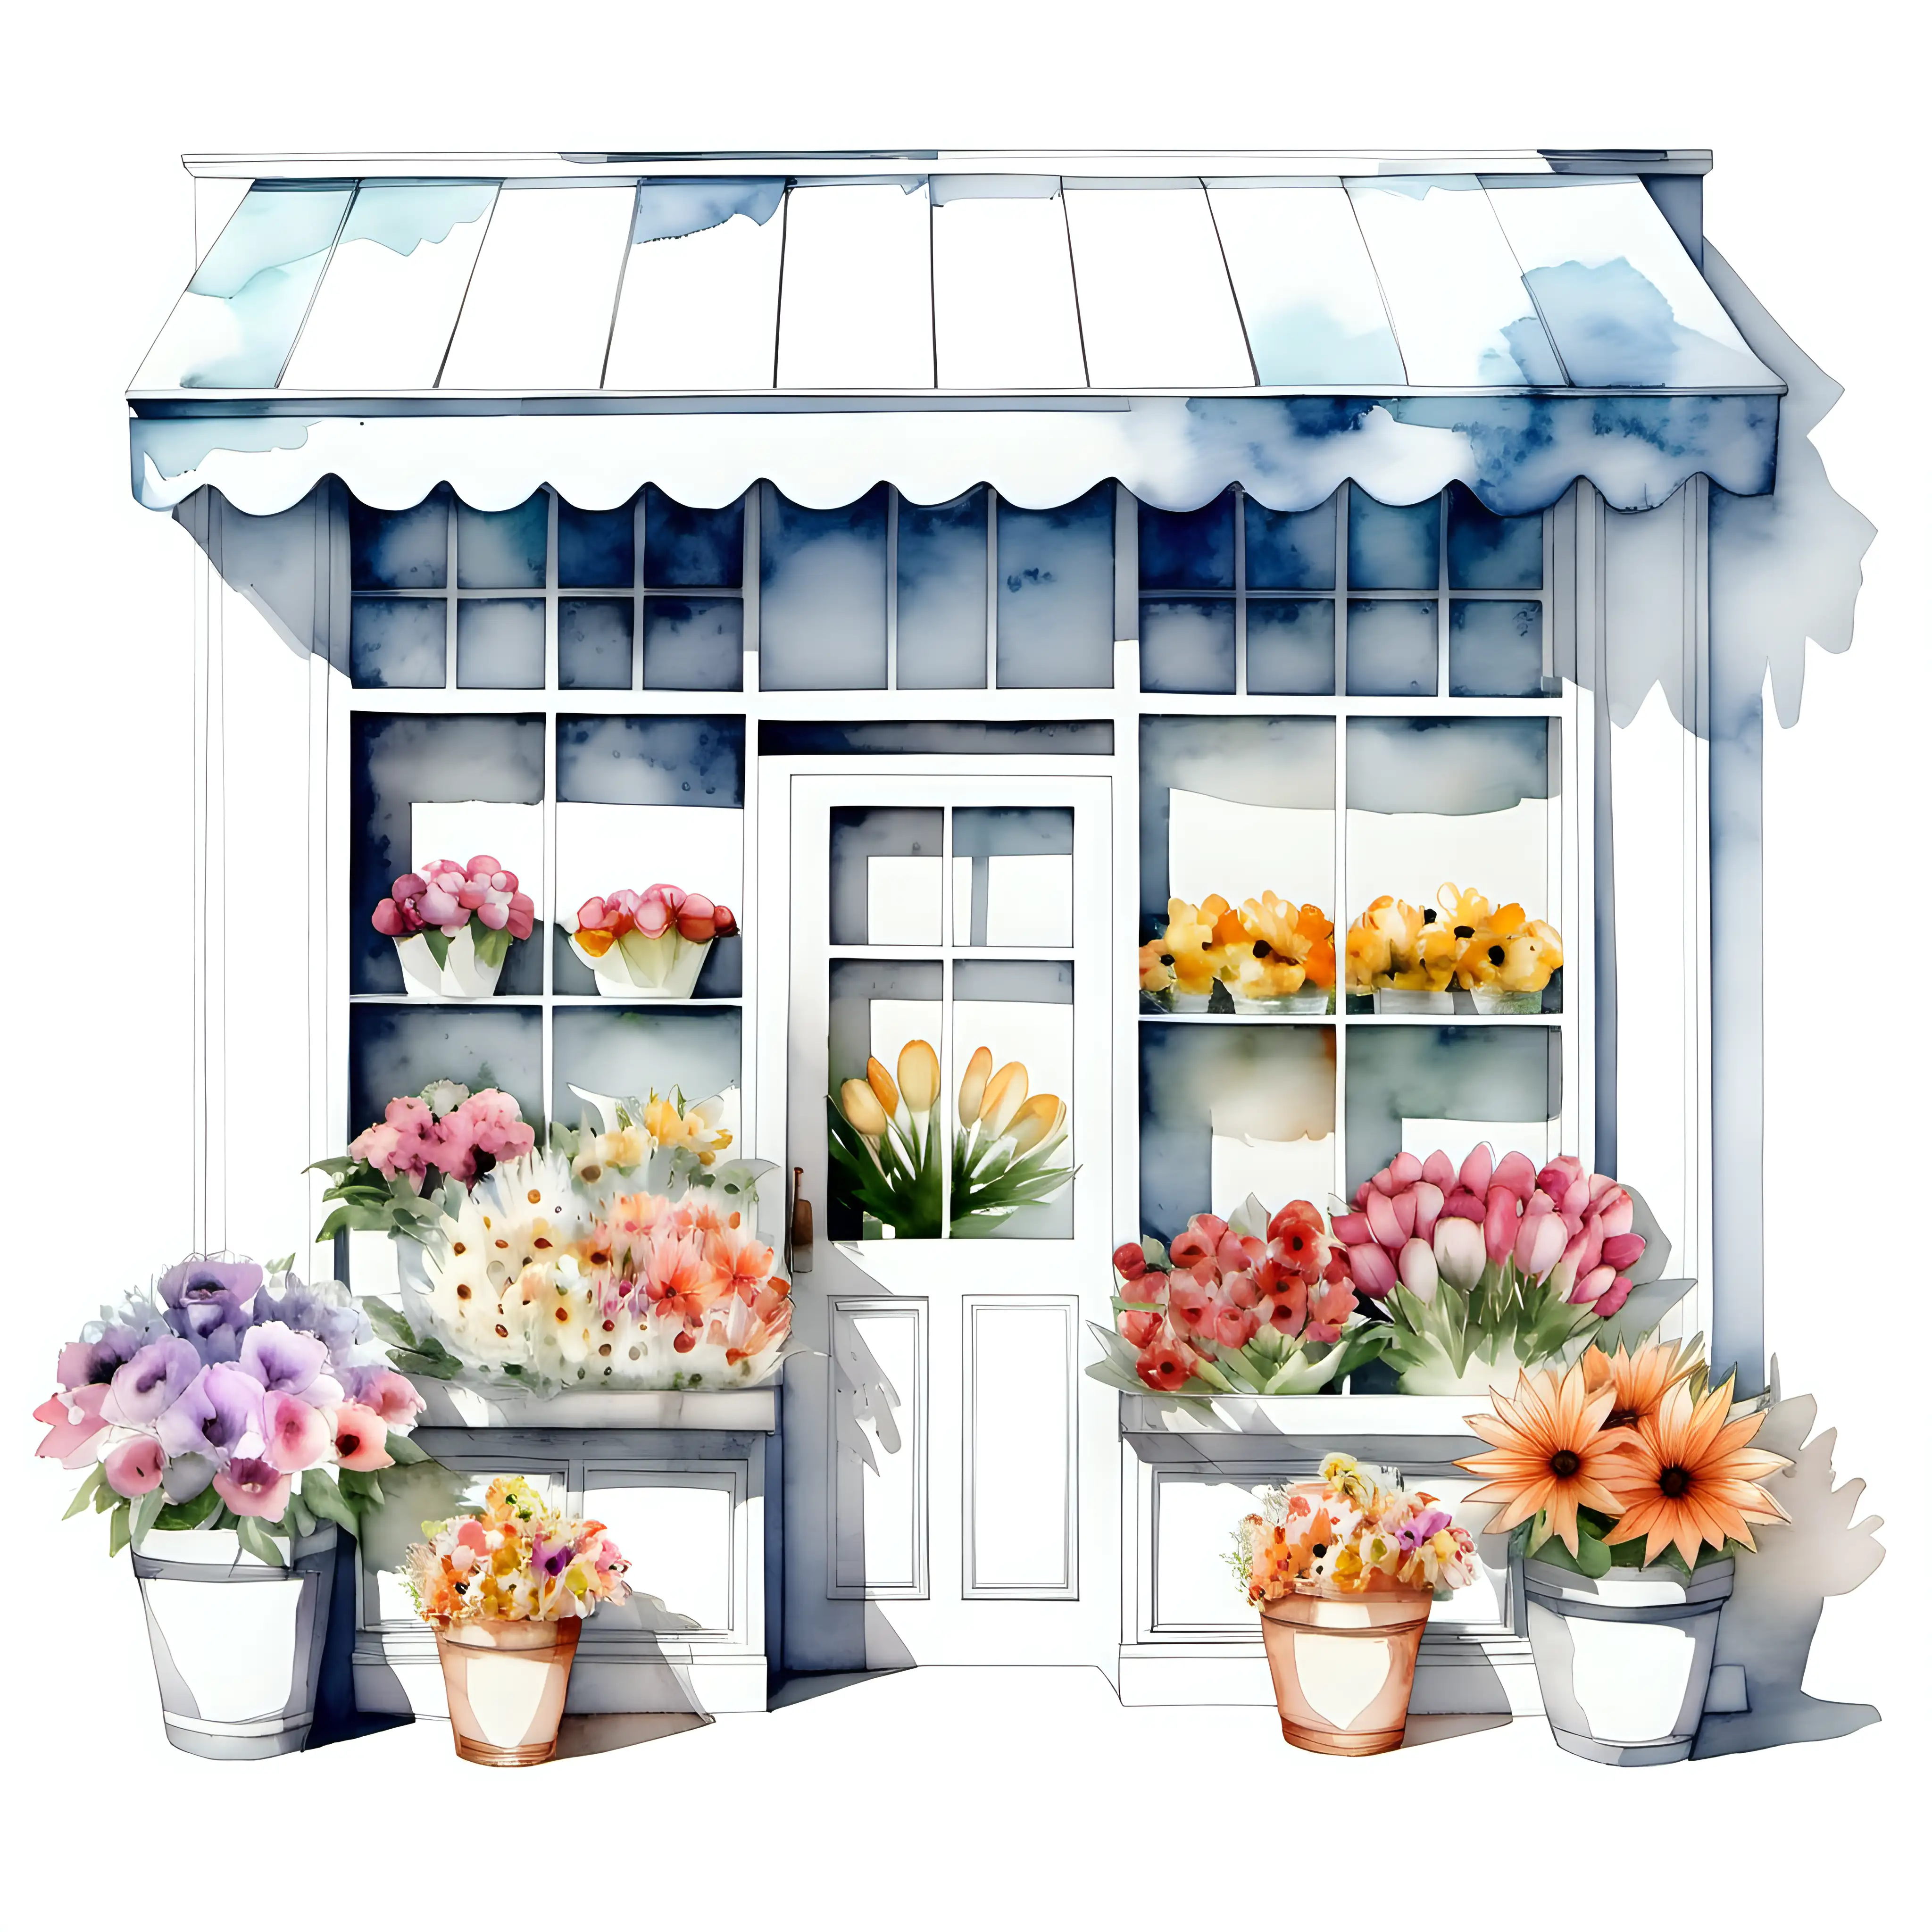 Artistic Watercolored Flower Shop on a Beautiful White Background